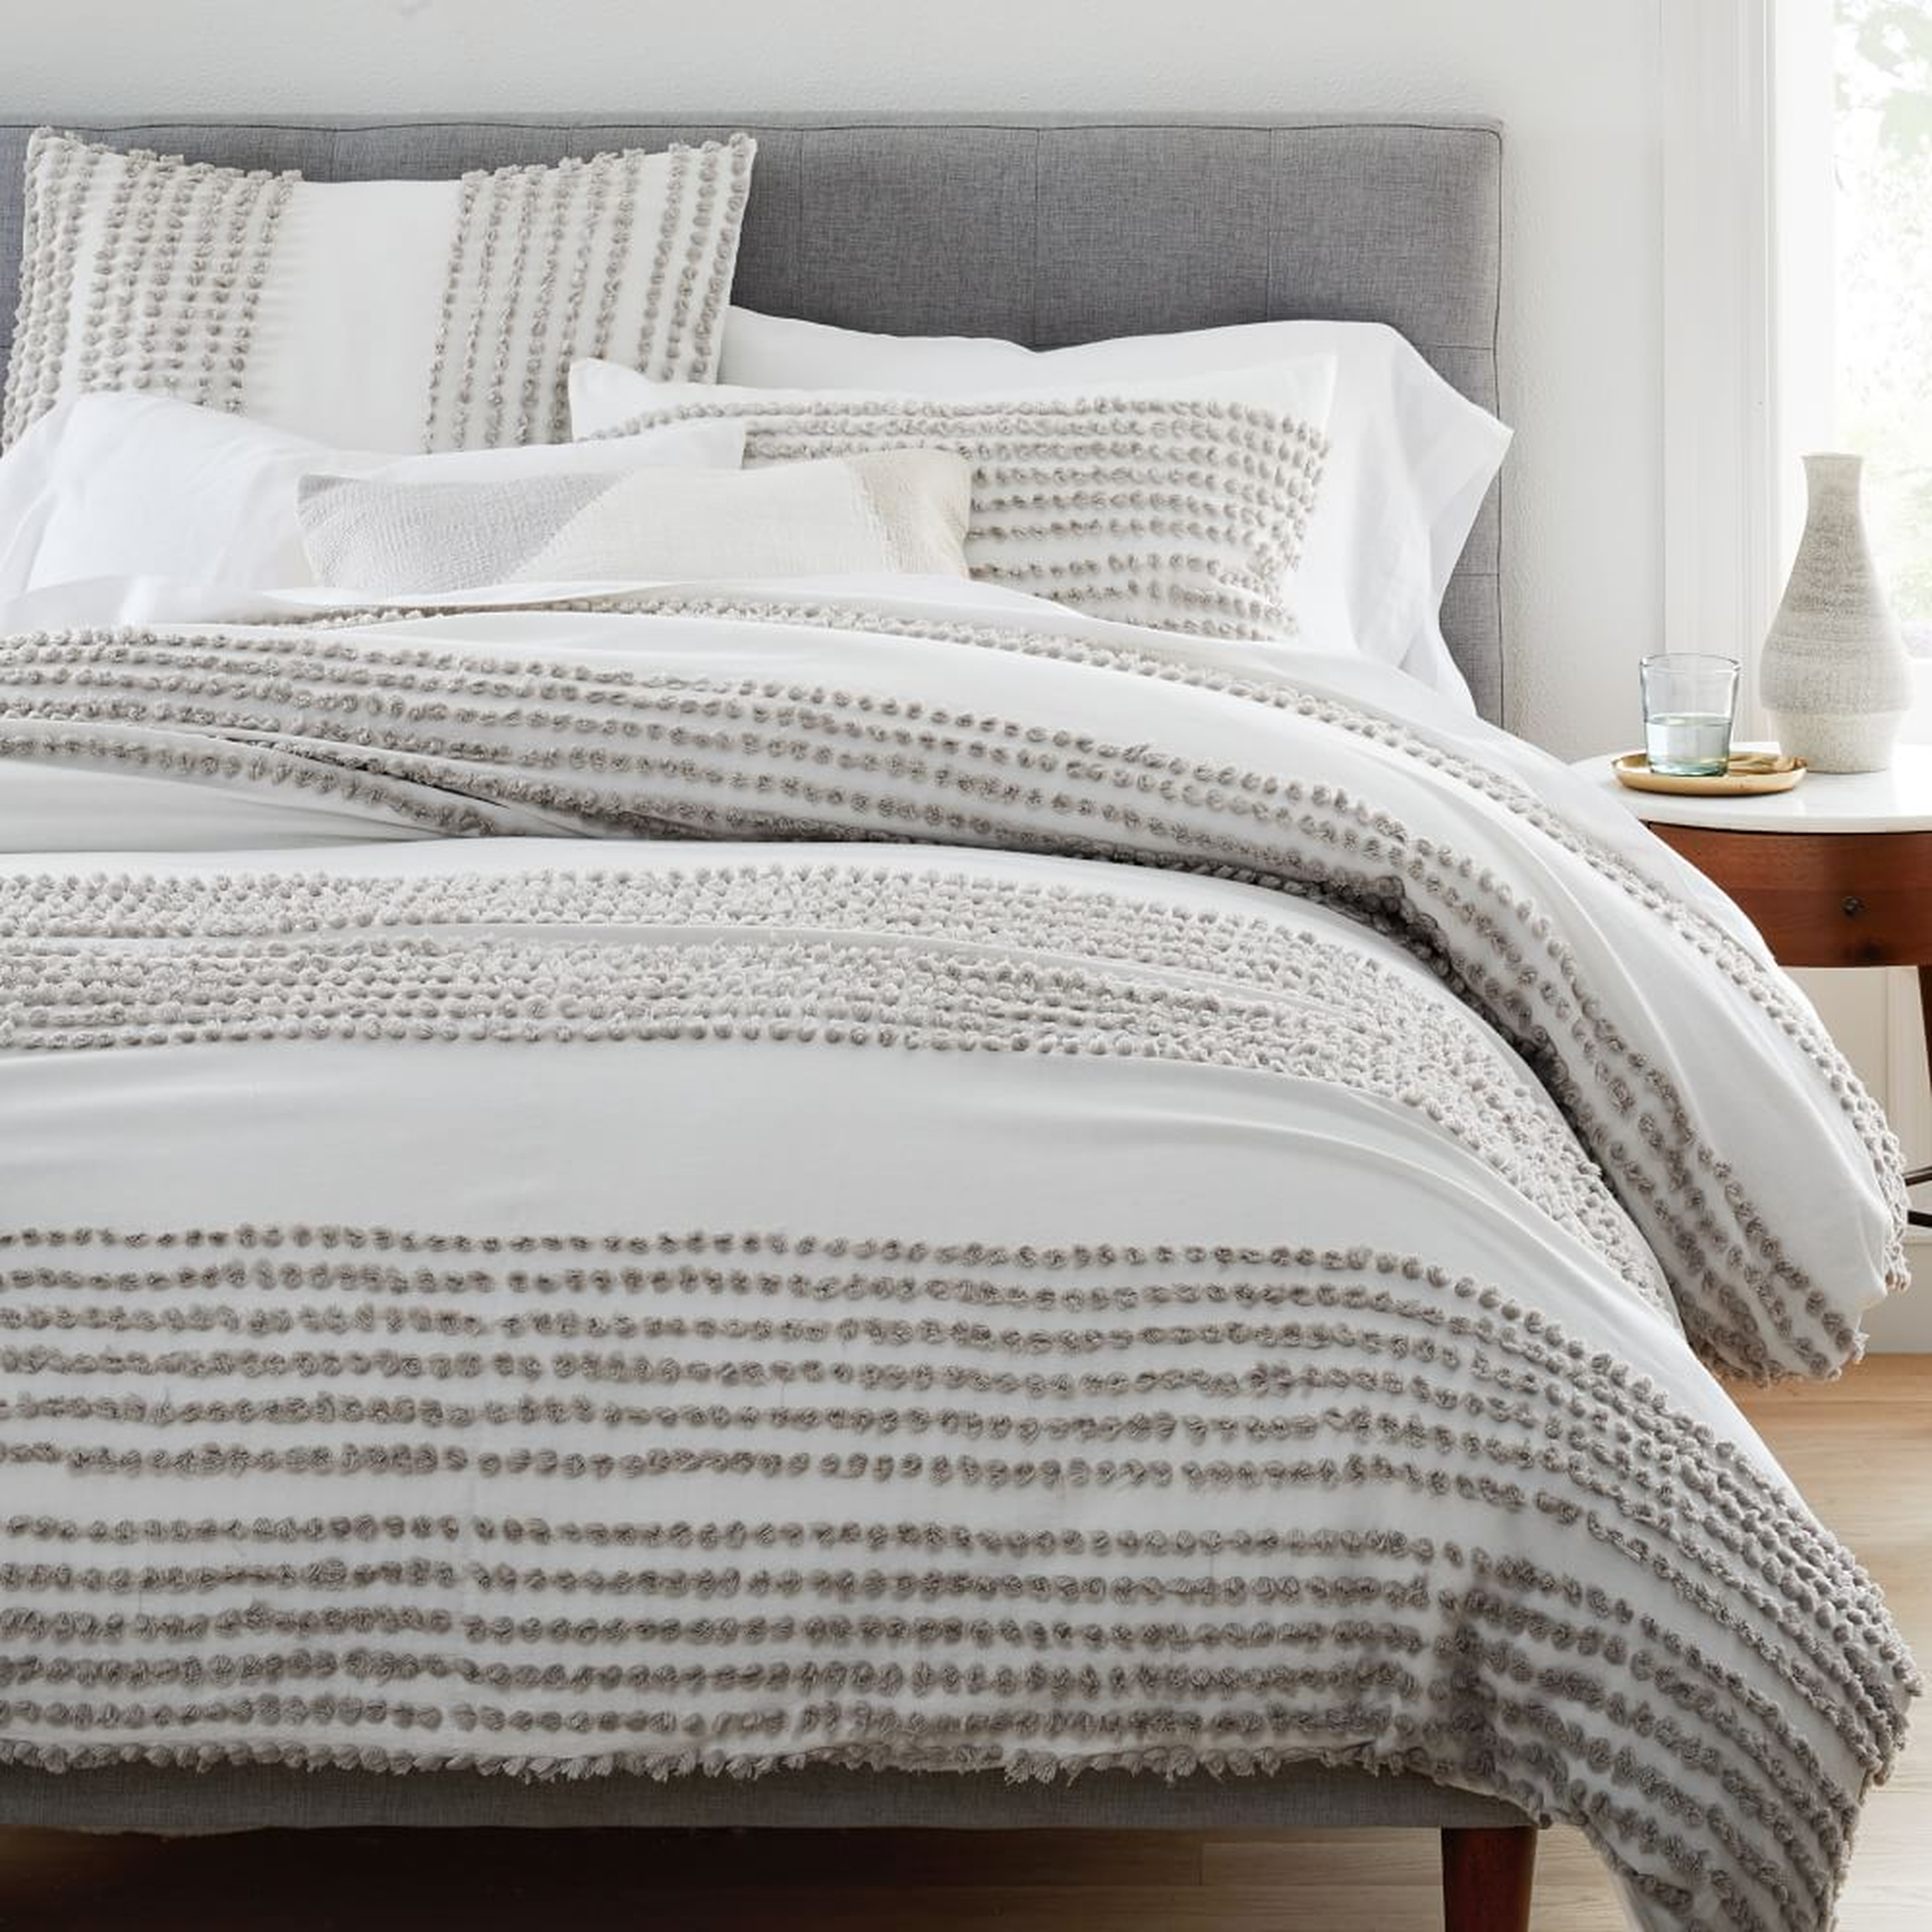 Candlewick Duvet, Full/Queen Set, White/Pearl Gray - West Elm